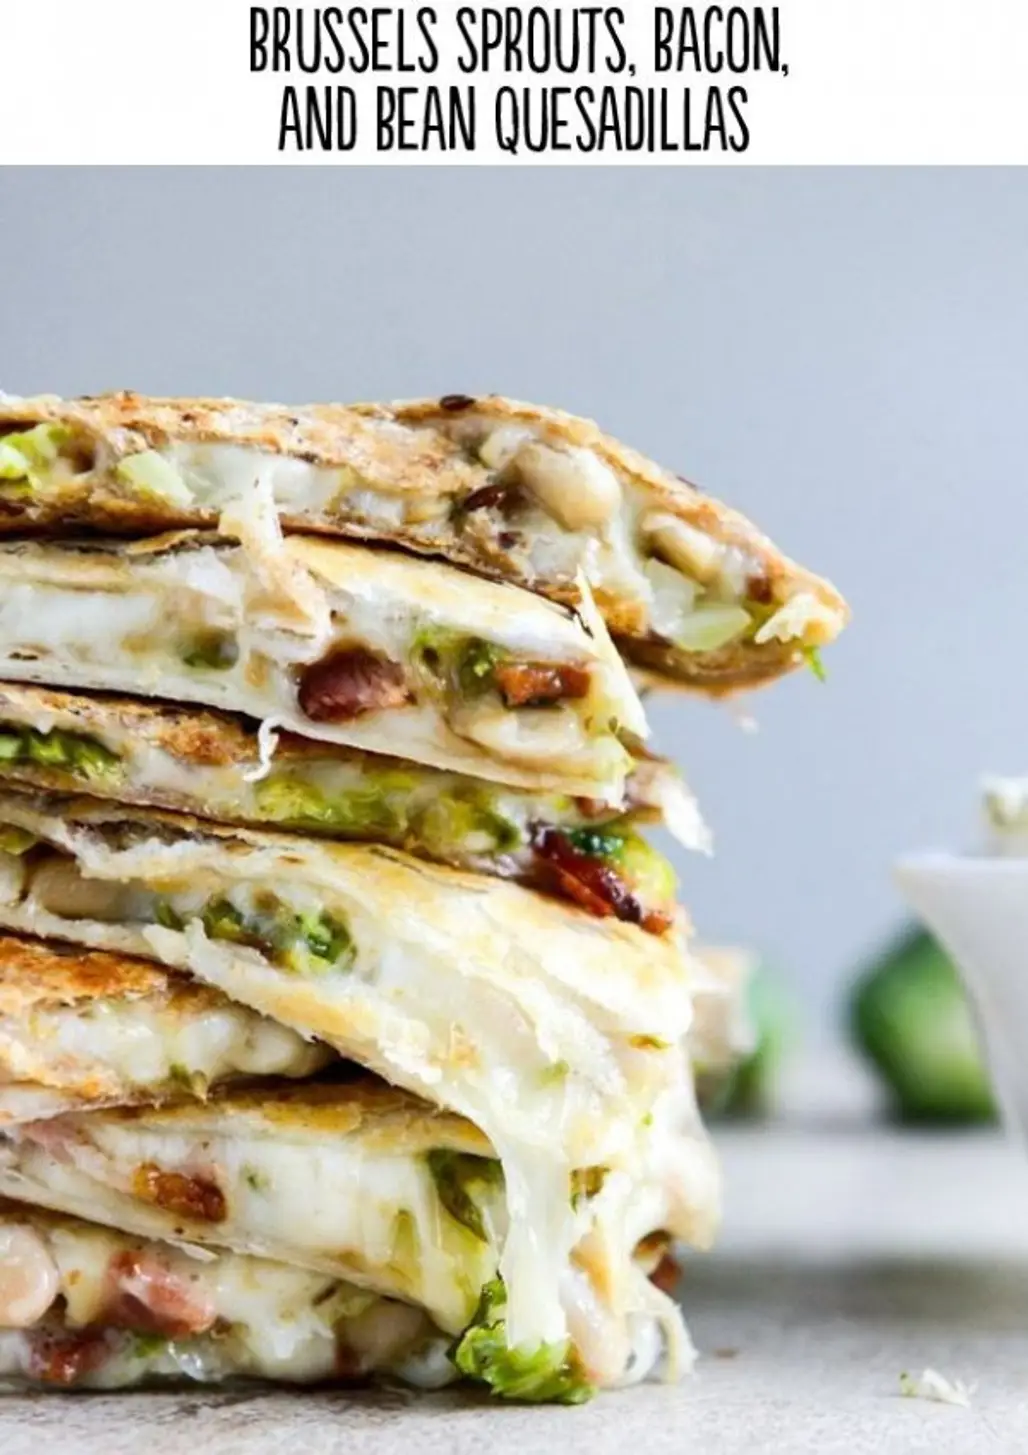 Brussels Sprouts, Bacon and Bean Quesadillas